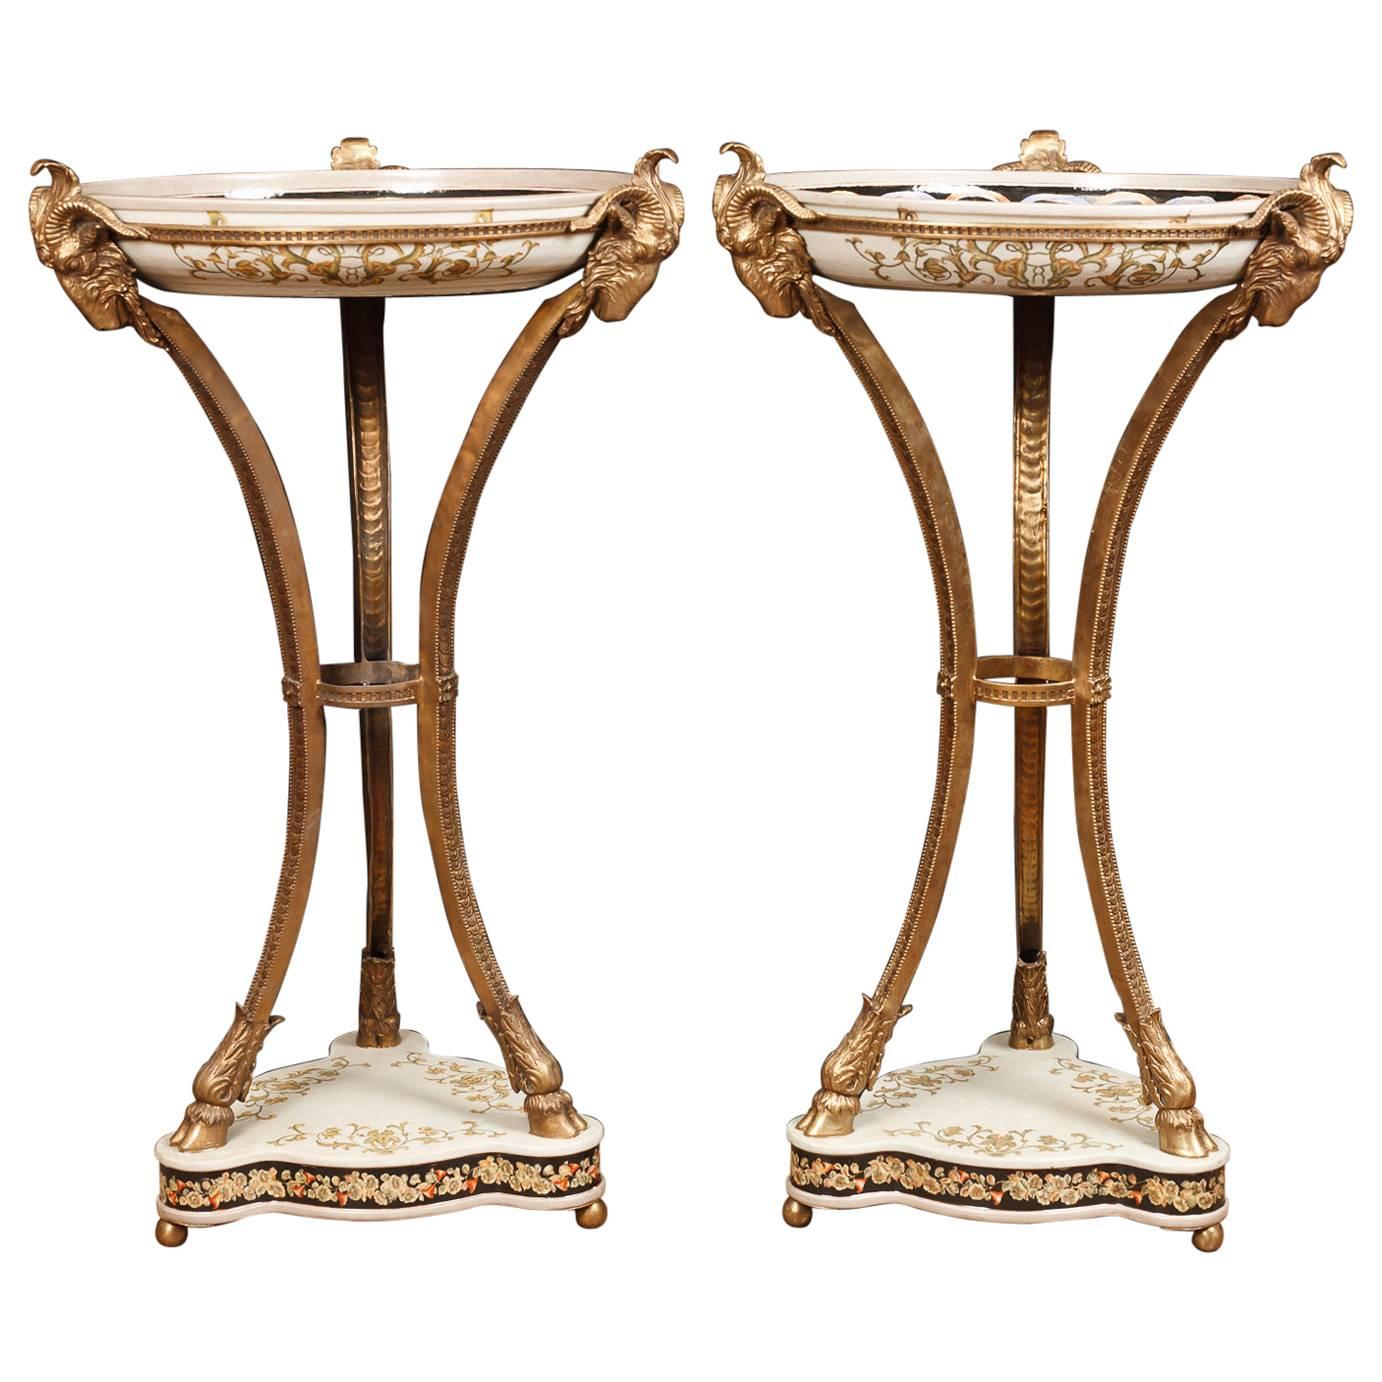 French Empire Style Ormolu Porcelain Torcheres Plant Stands Jardineres For Sale